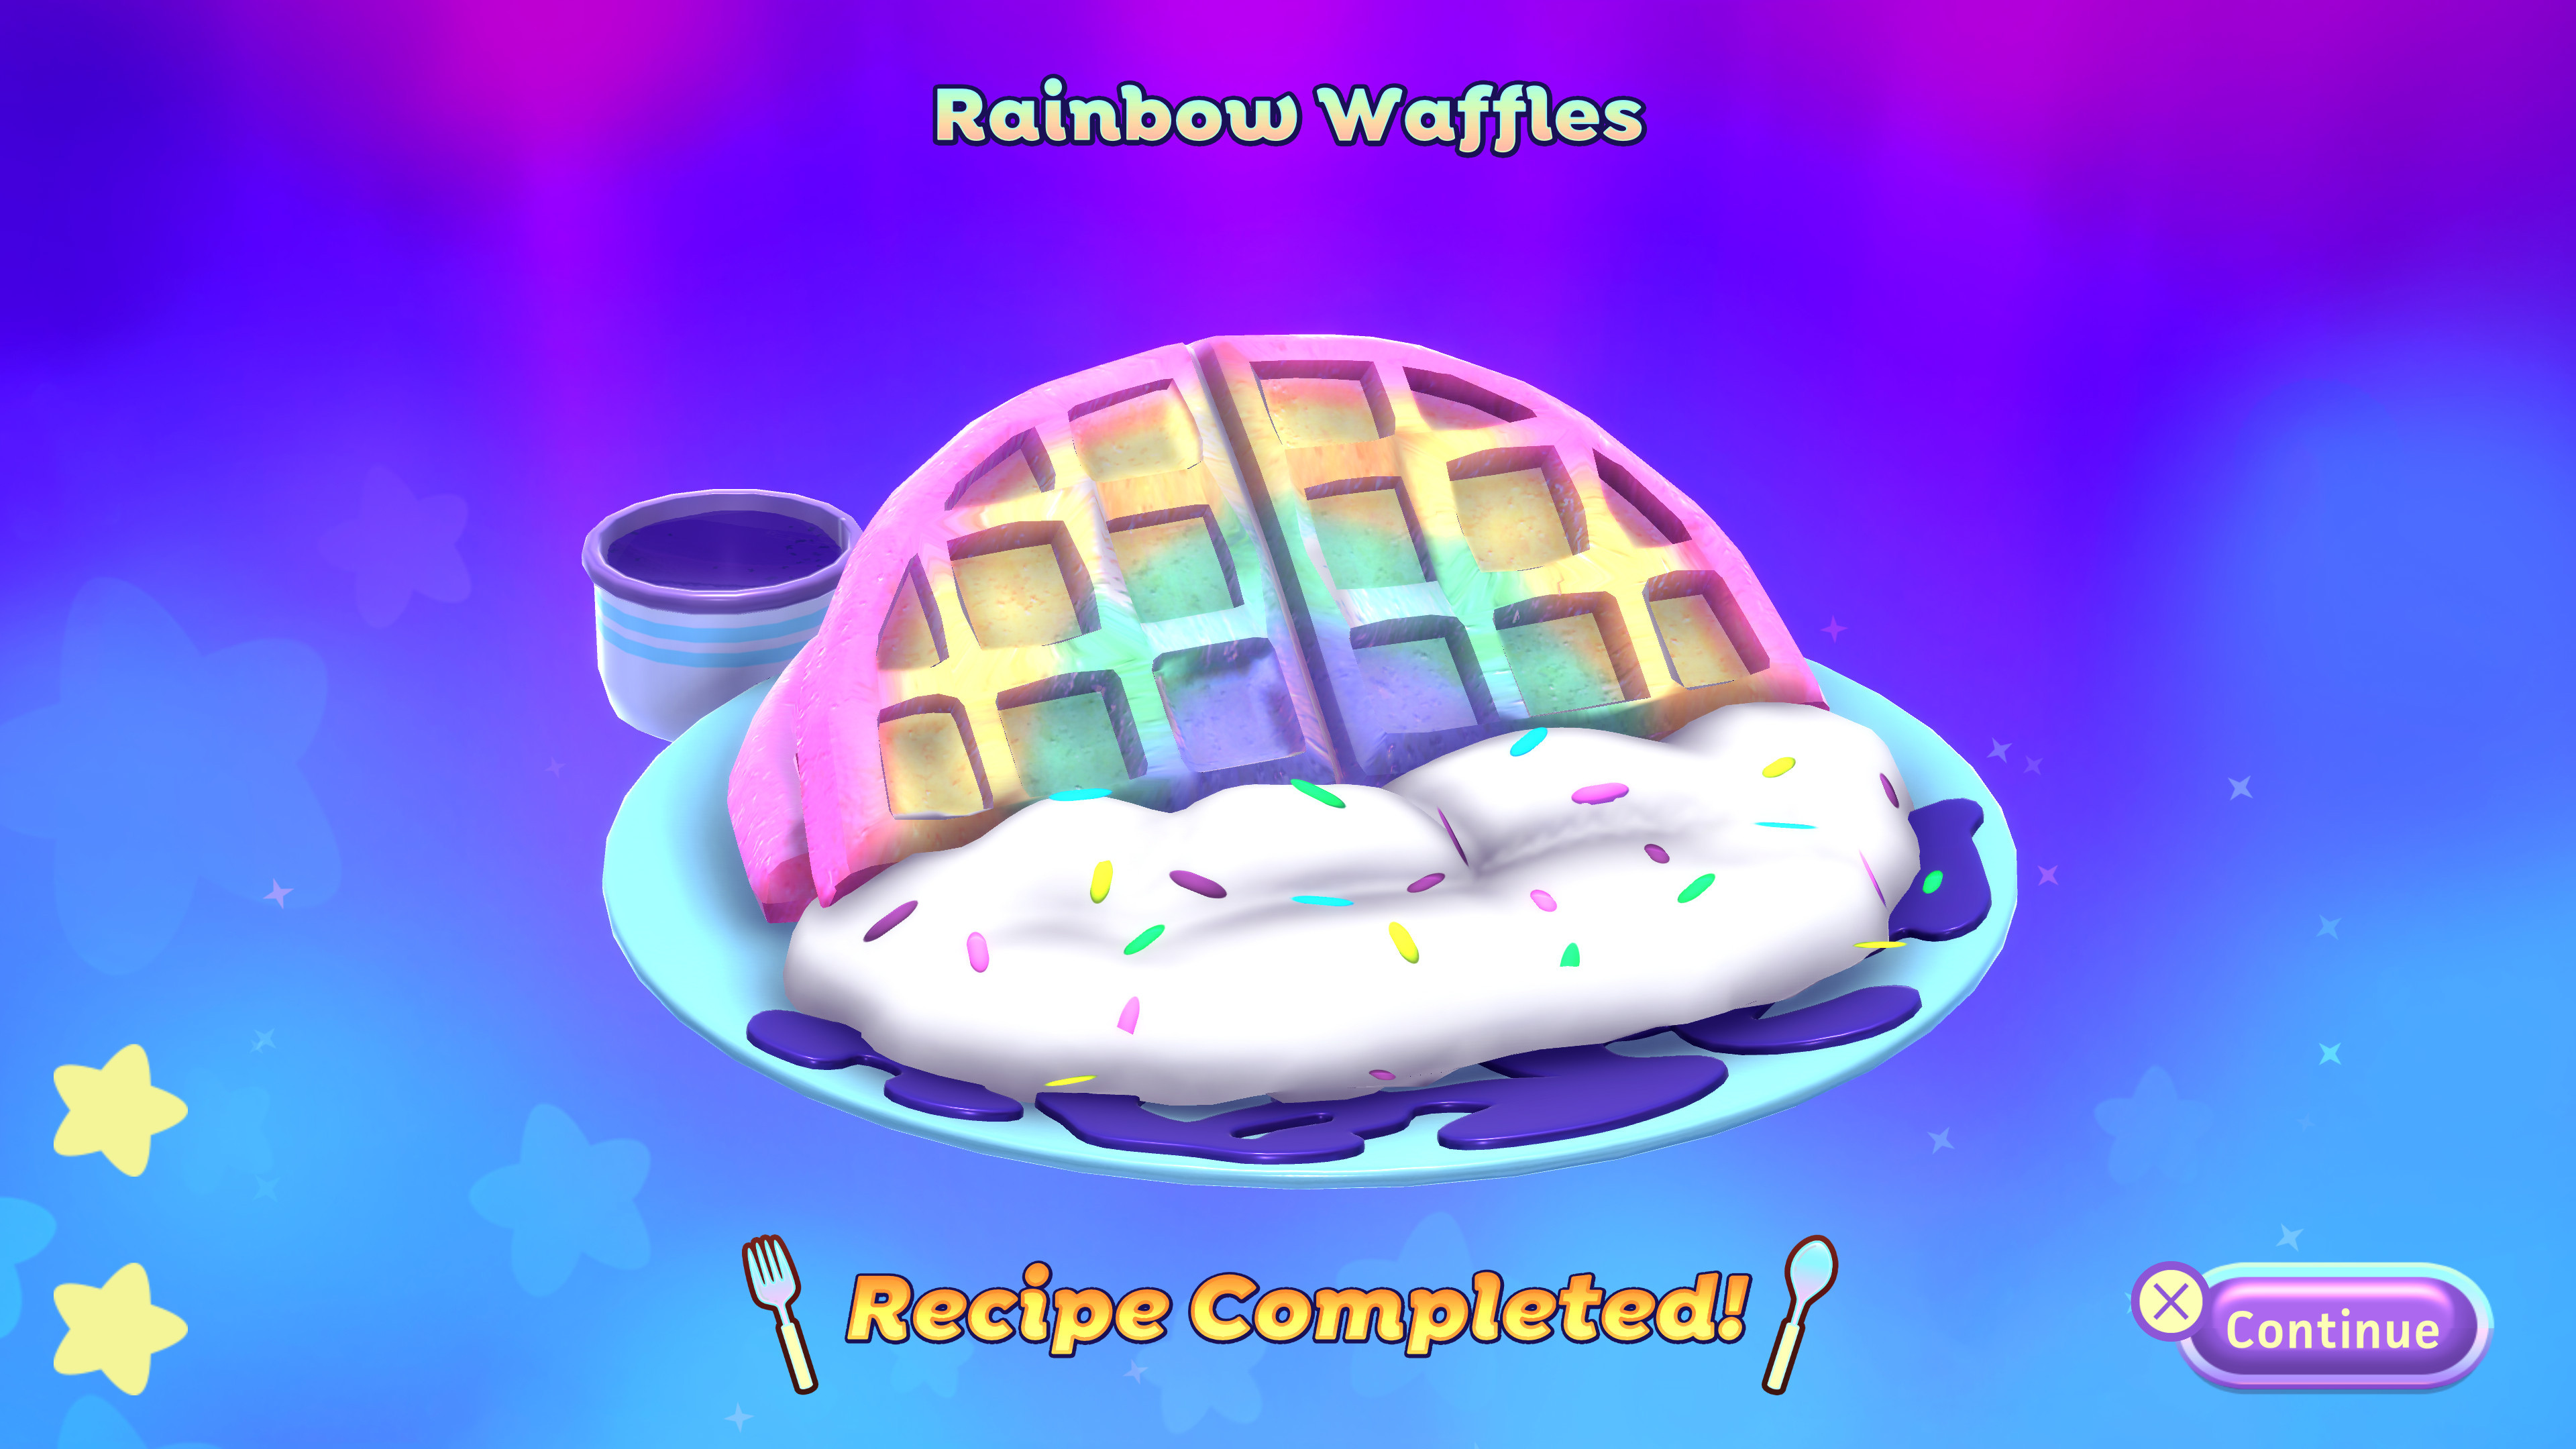 I made the final plating assets for a few recipes, based on internal concept art. This is the result for Rainbow Waffles.